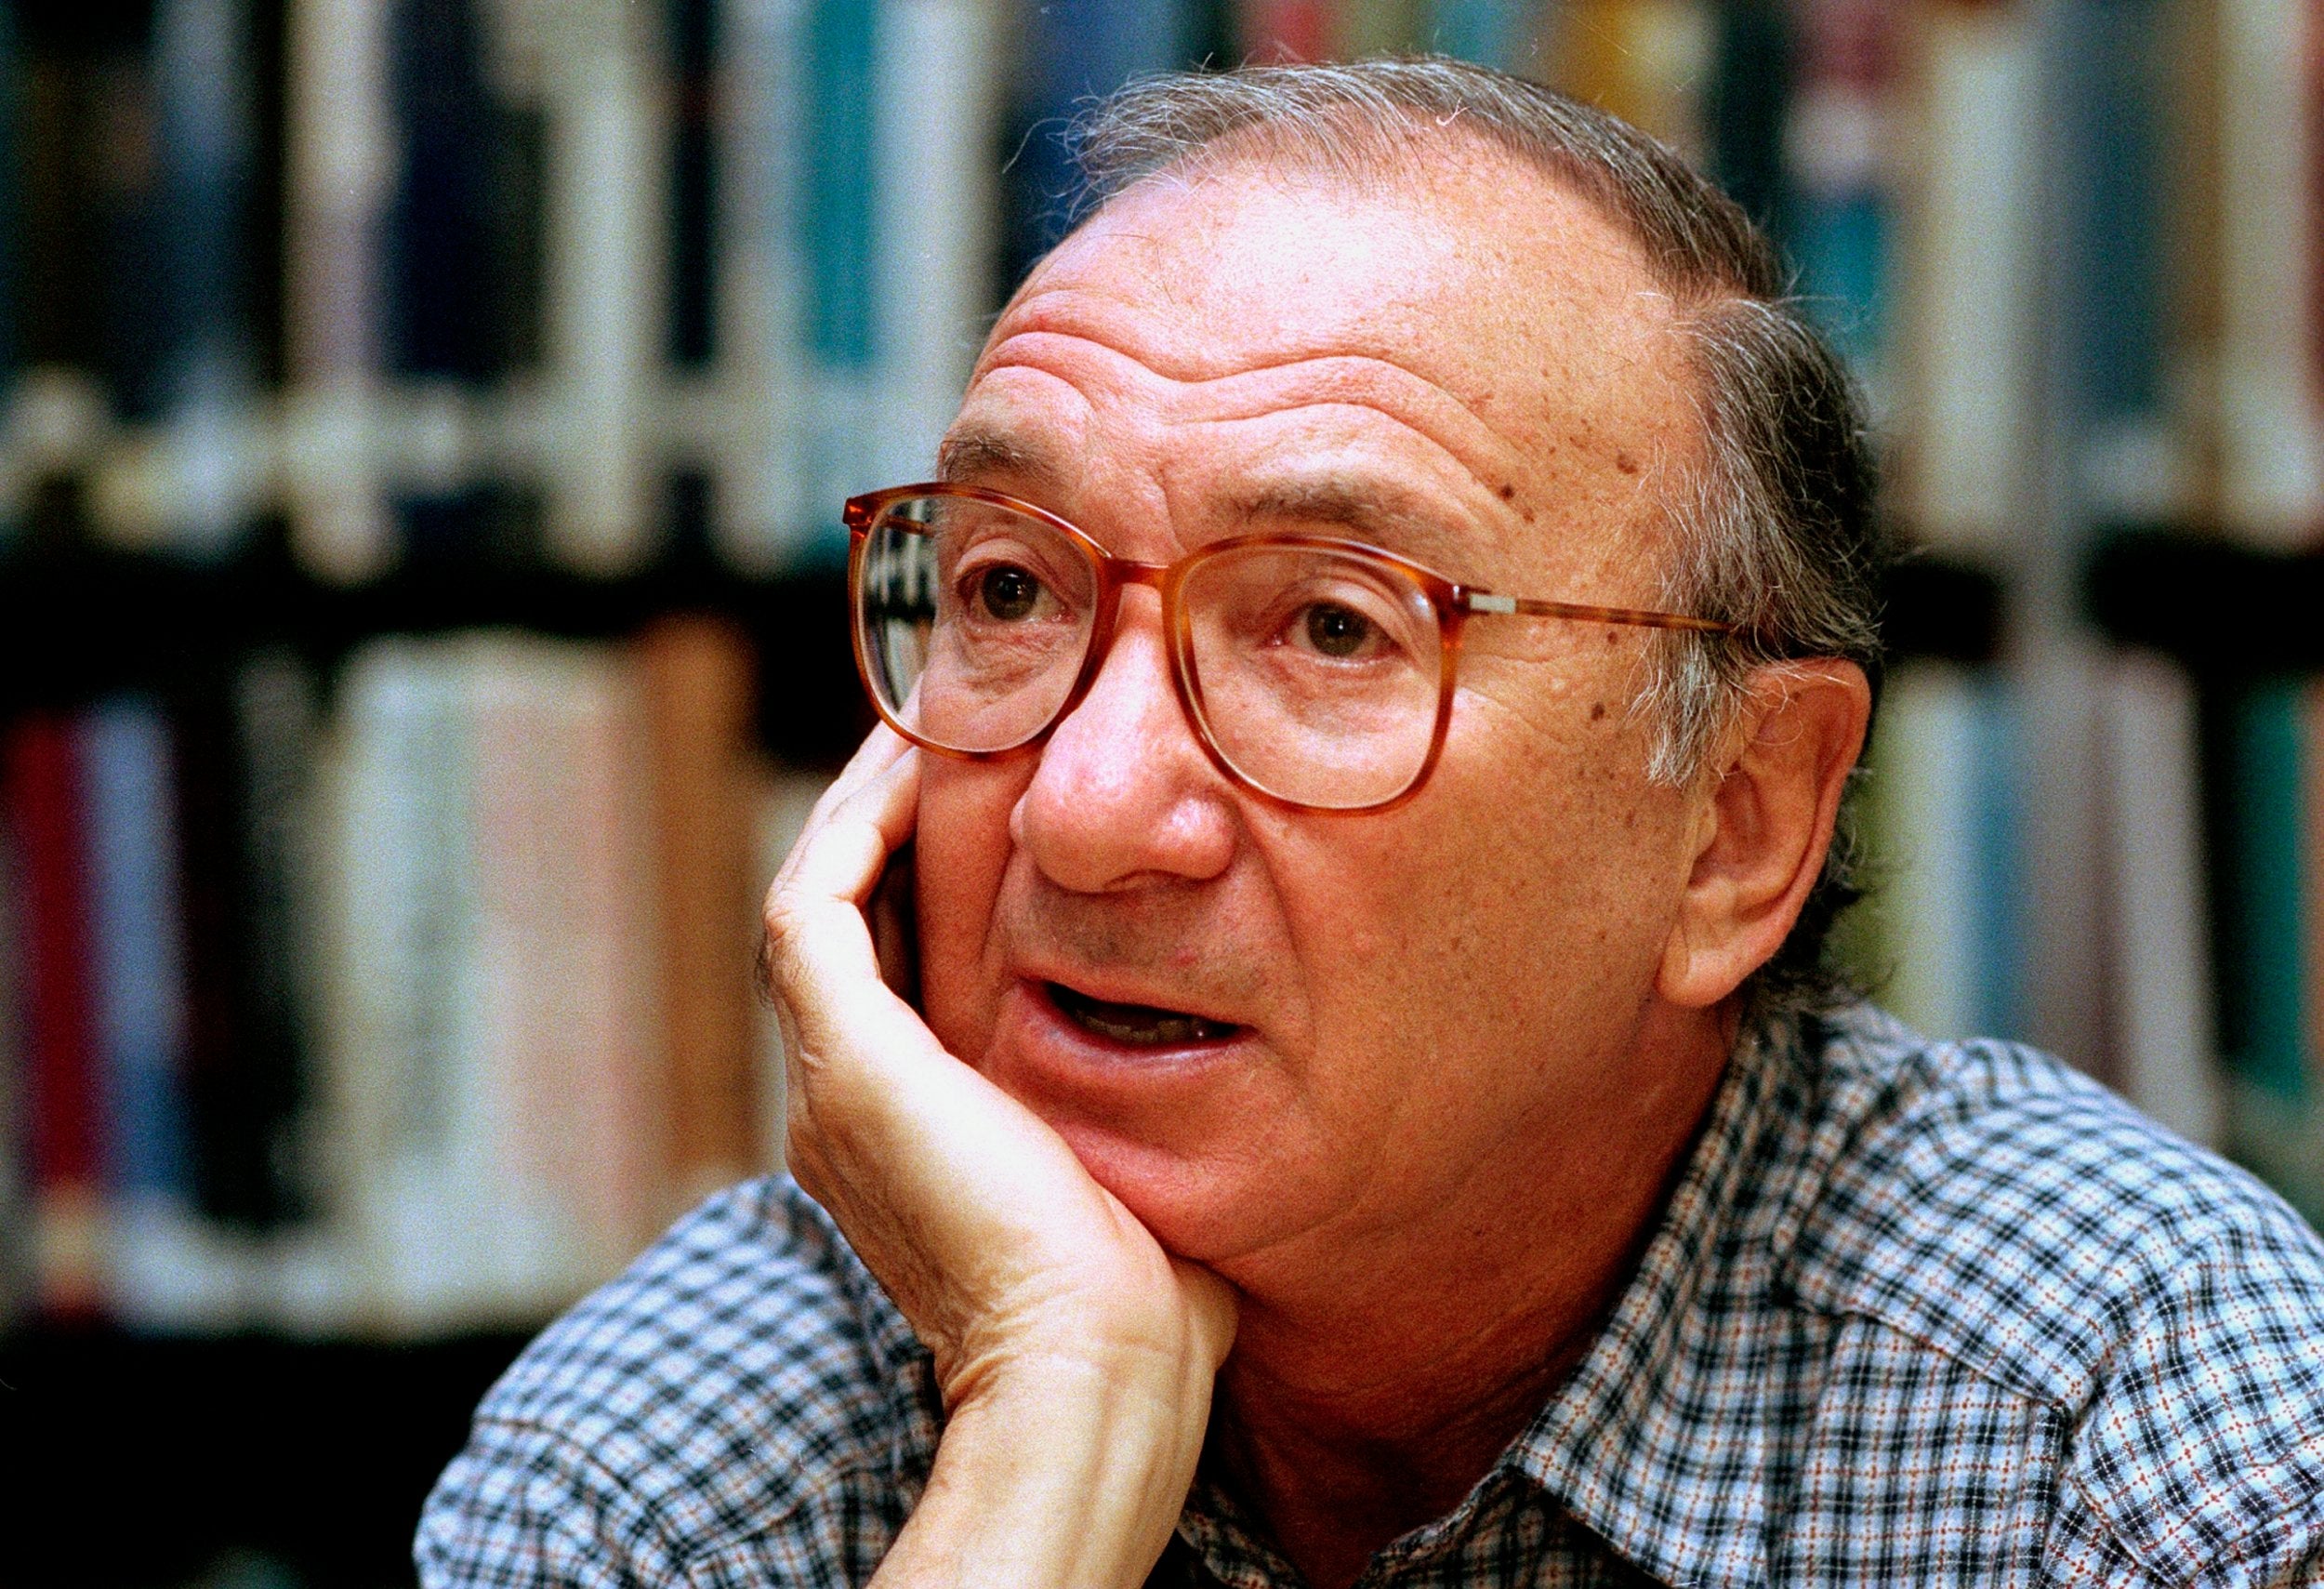 Neil Simon, pictured here in 1994, was 'a master of comedy' whose works dominated Broadway for decades